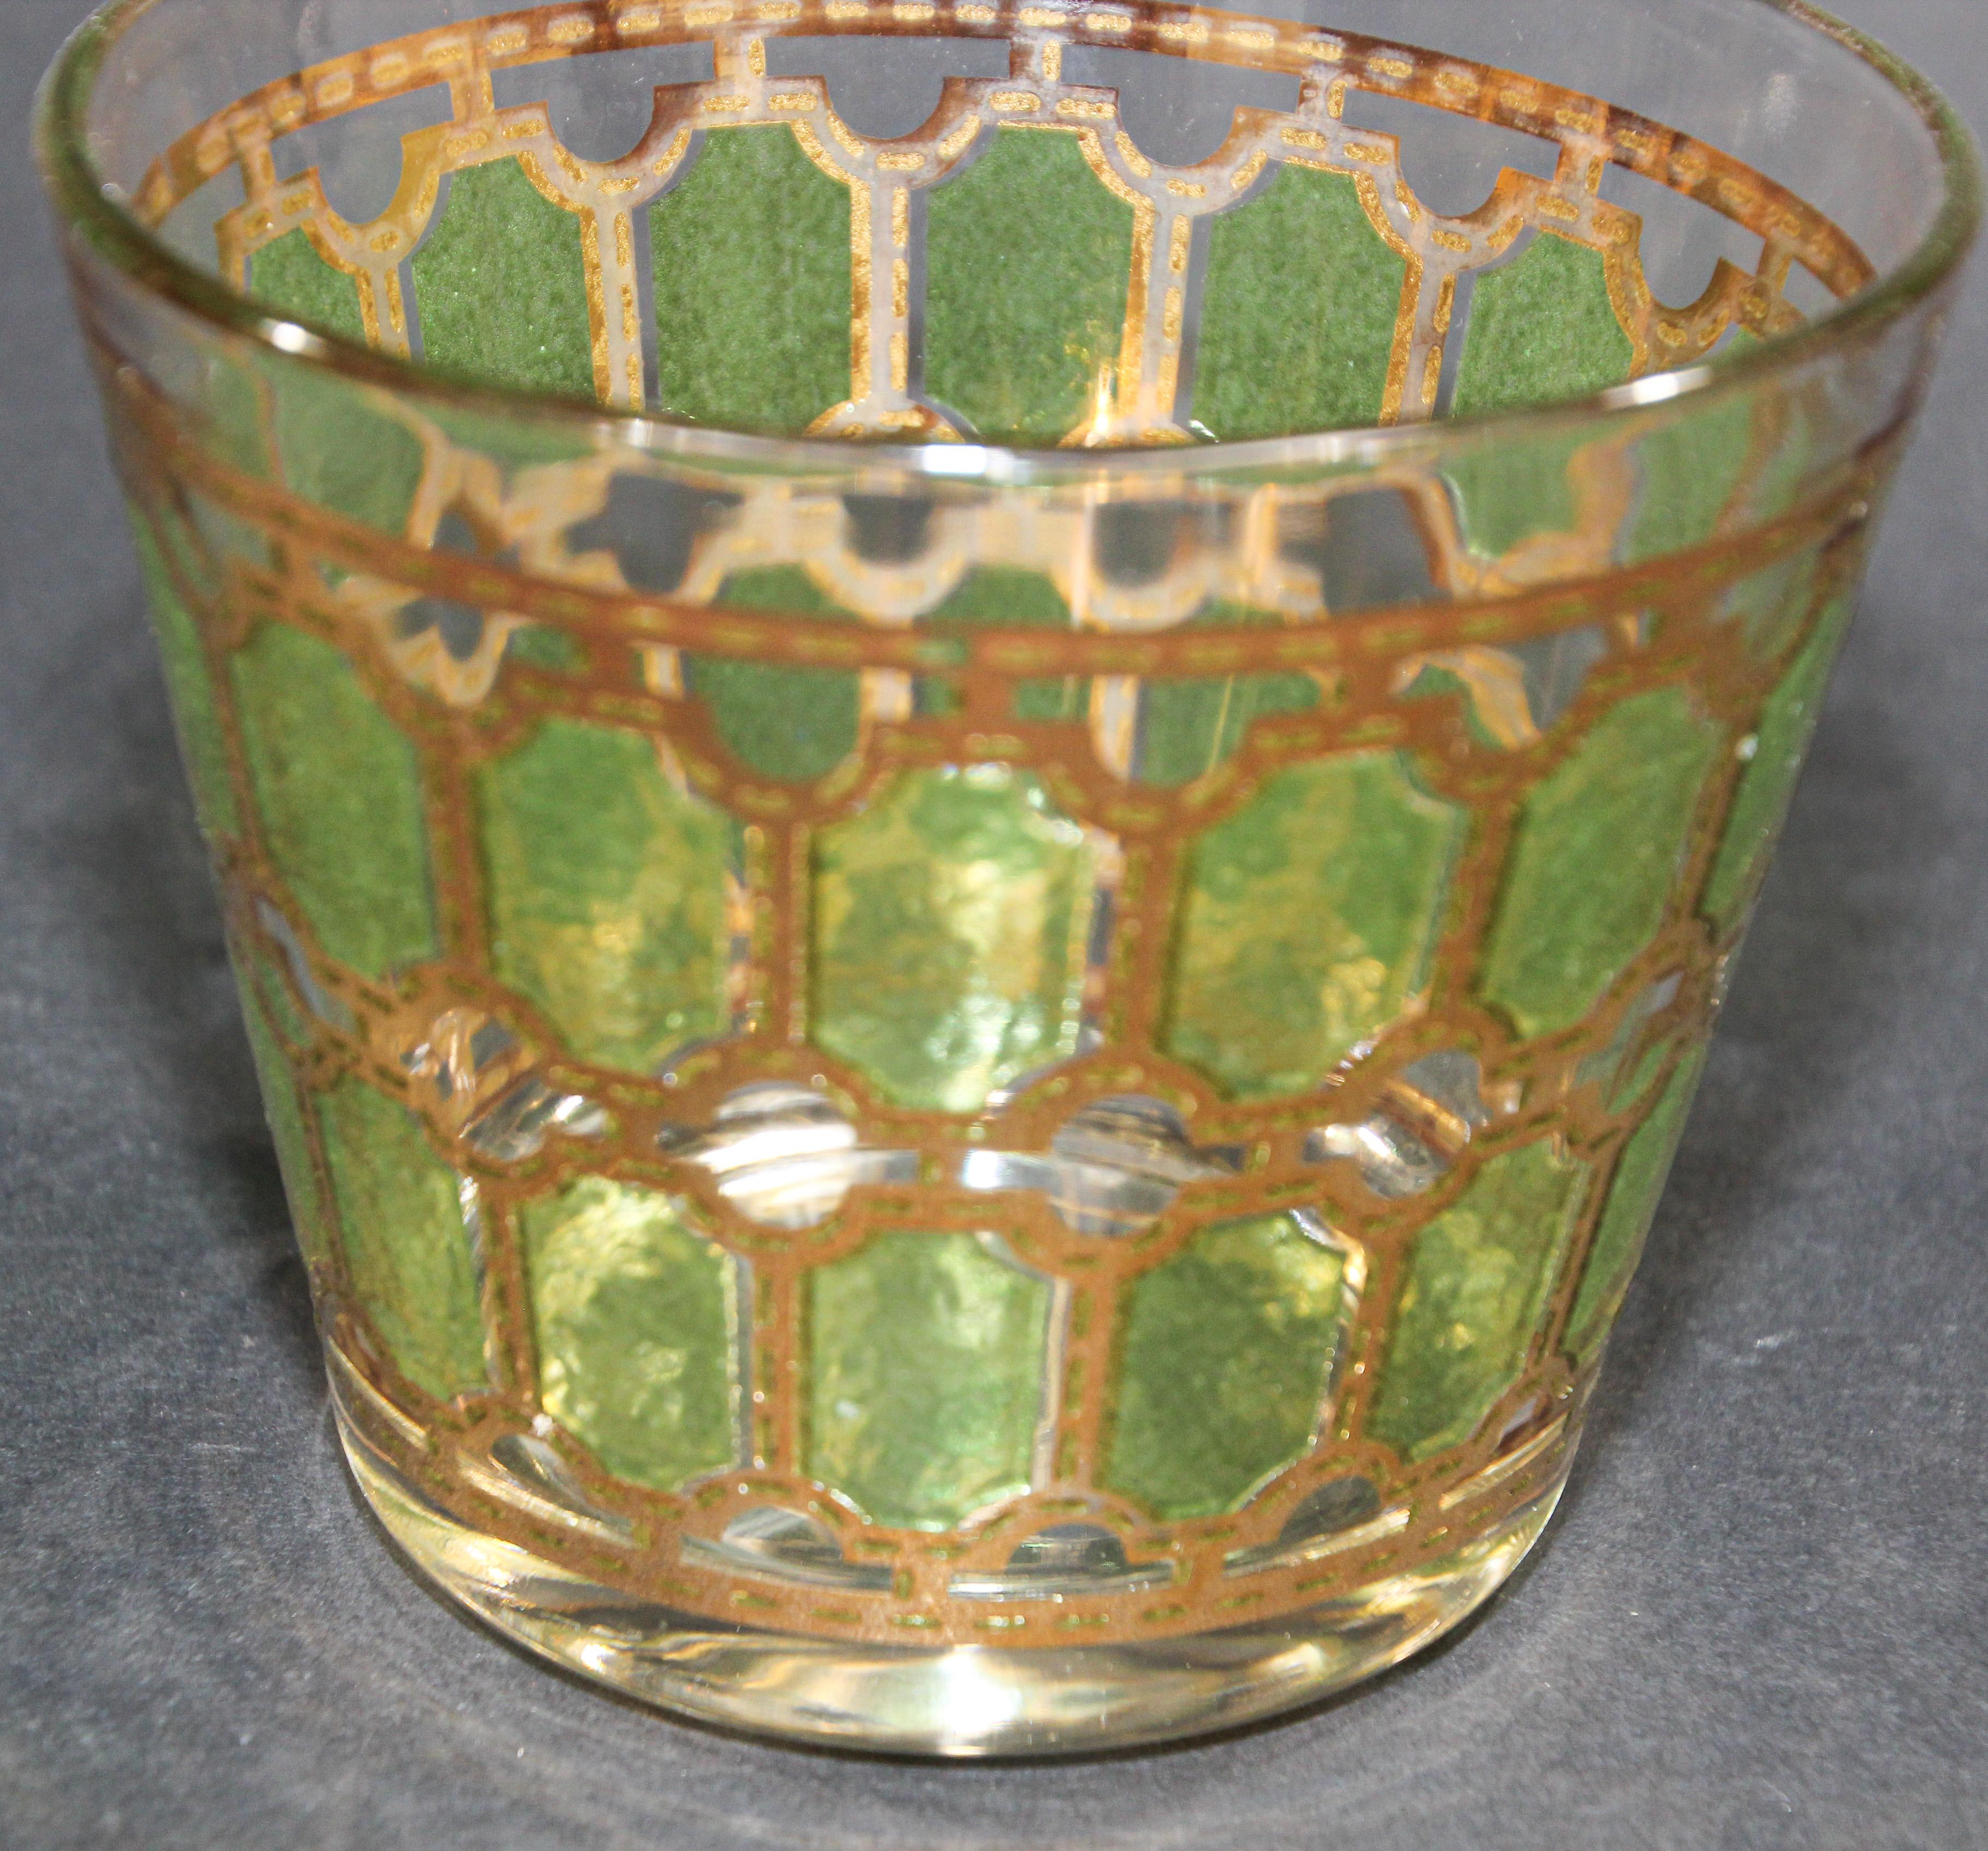 American Vintage Midcentury Green and Gold Ice Bucket 1960s